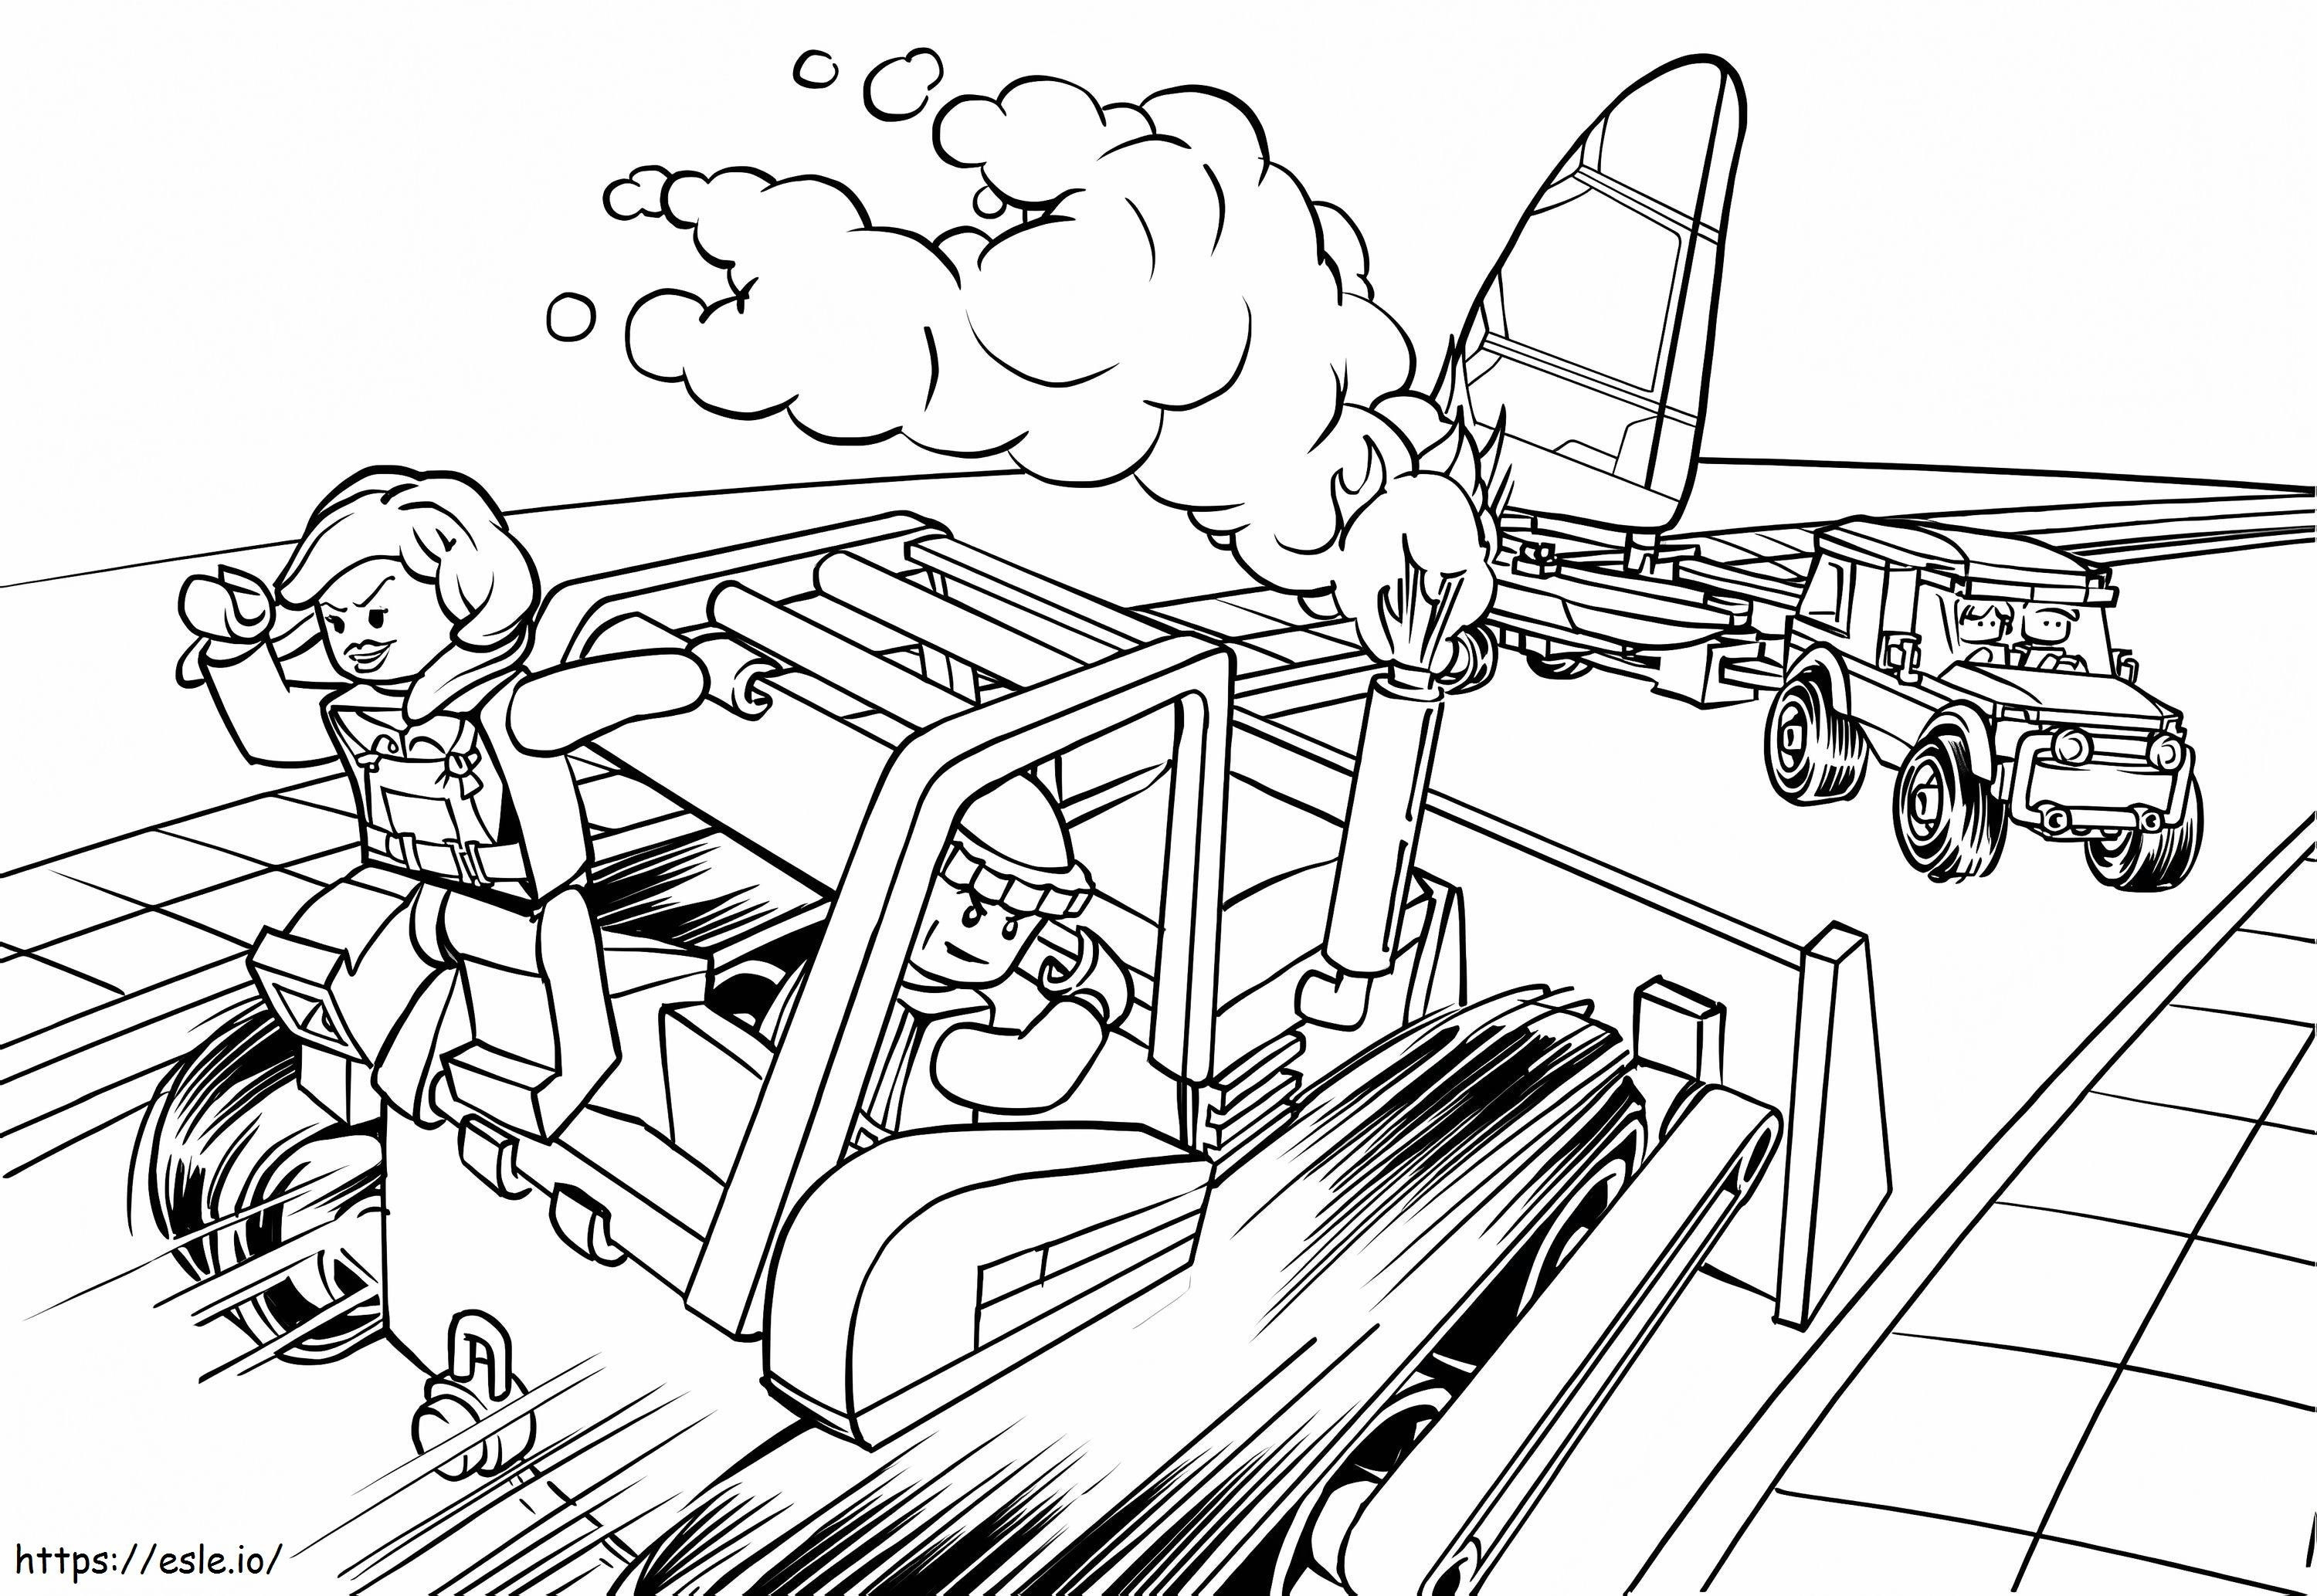 Chasing Lego City coloring page